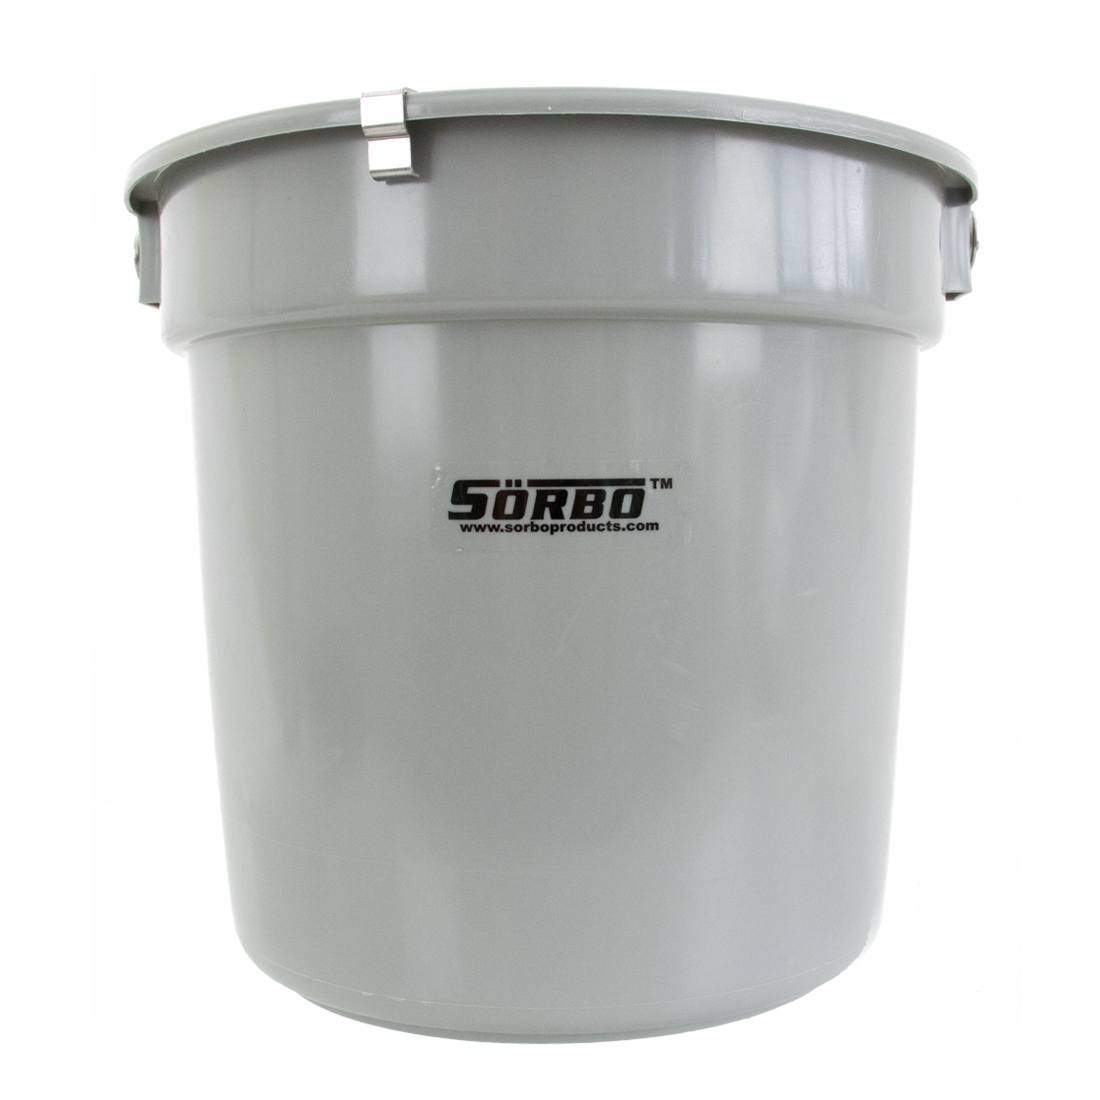 Sorbo Quadropod Buckets, Replacement Parts